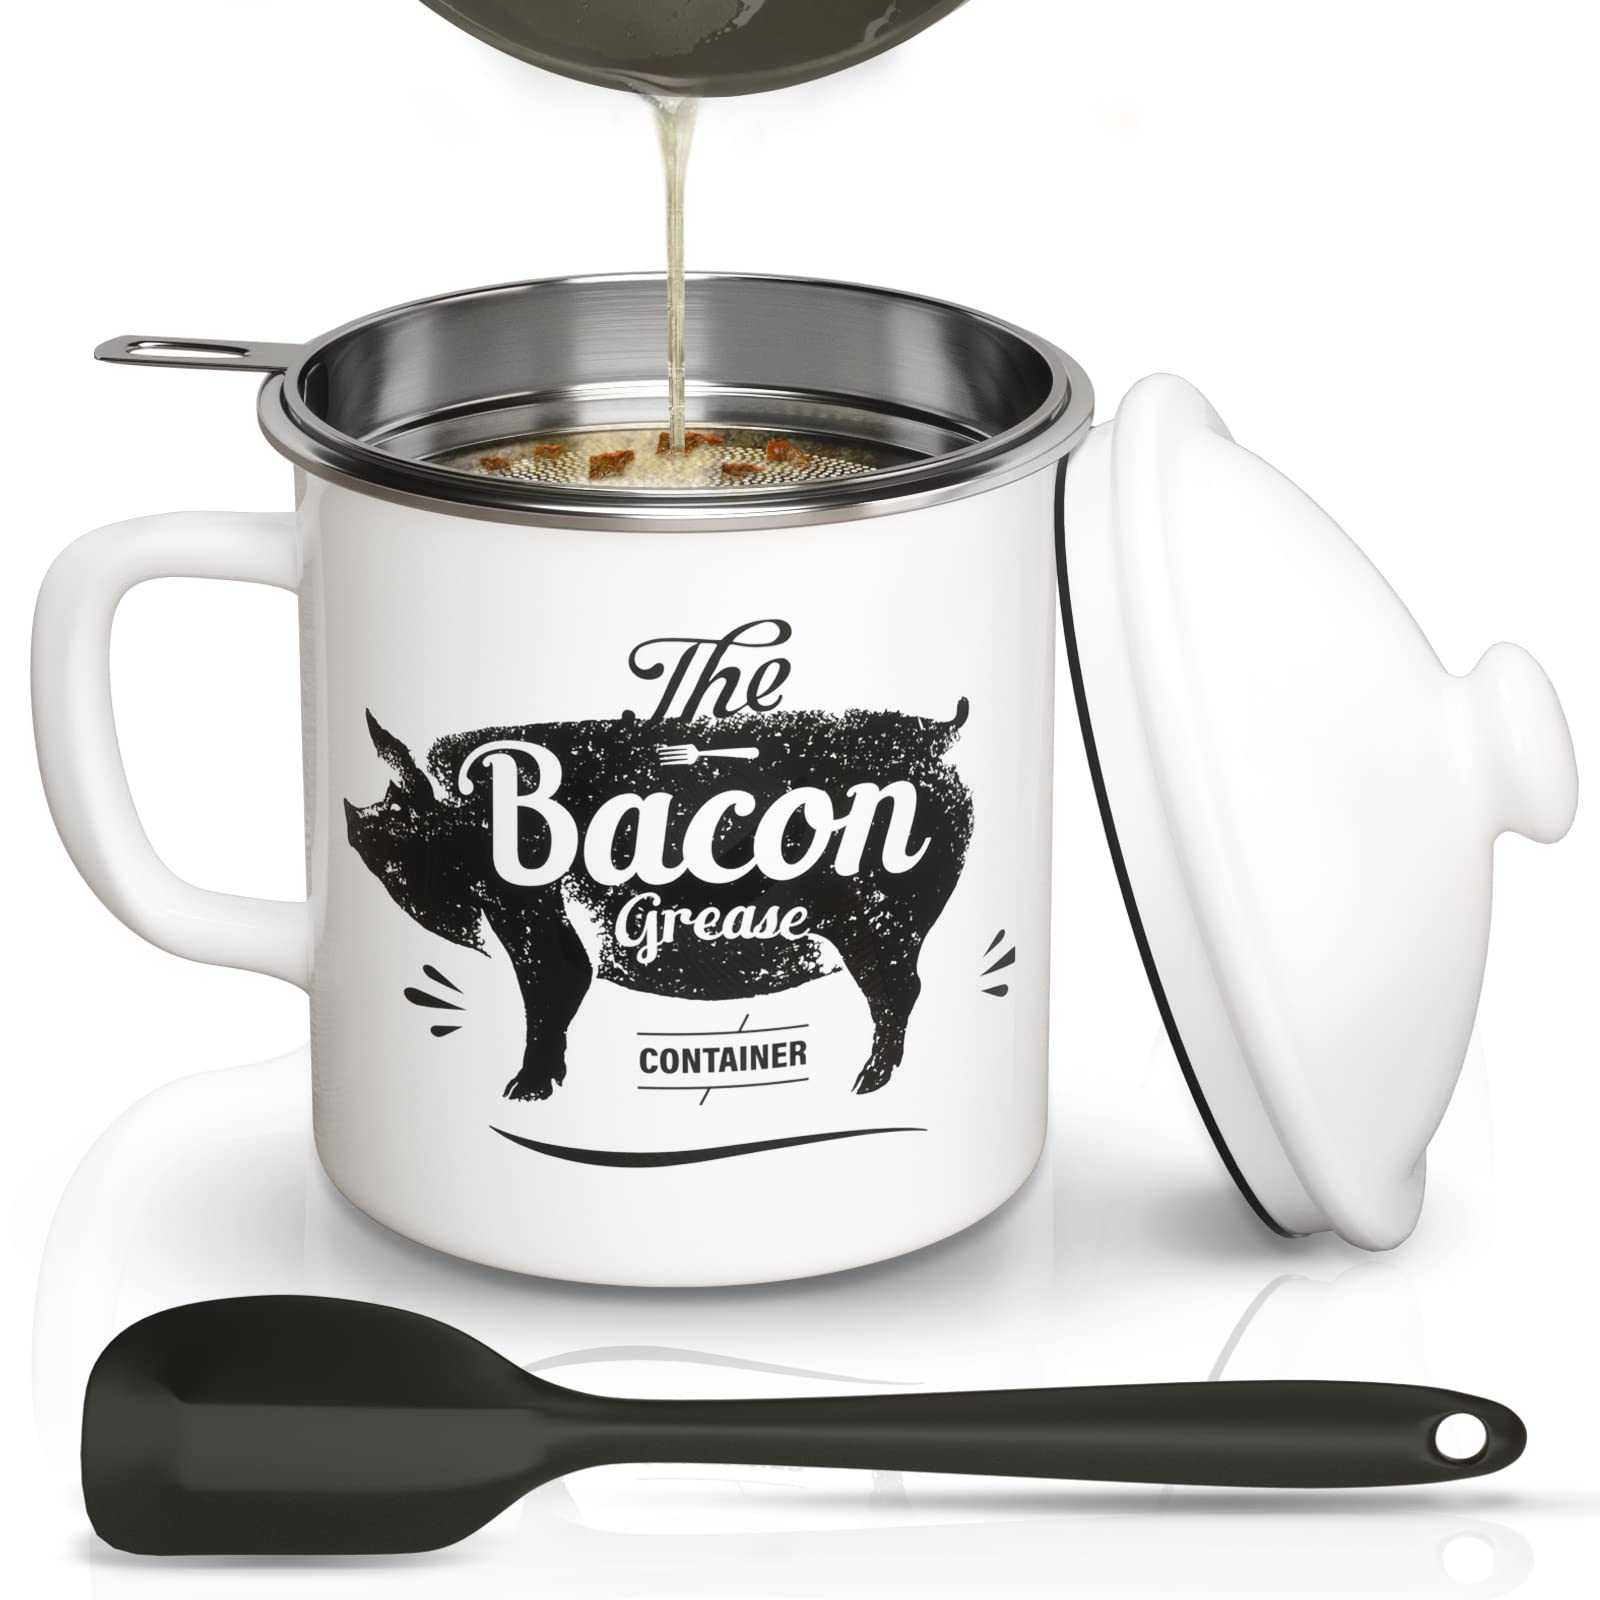  Zulay Bacon Grease Container With Strainer, Lid